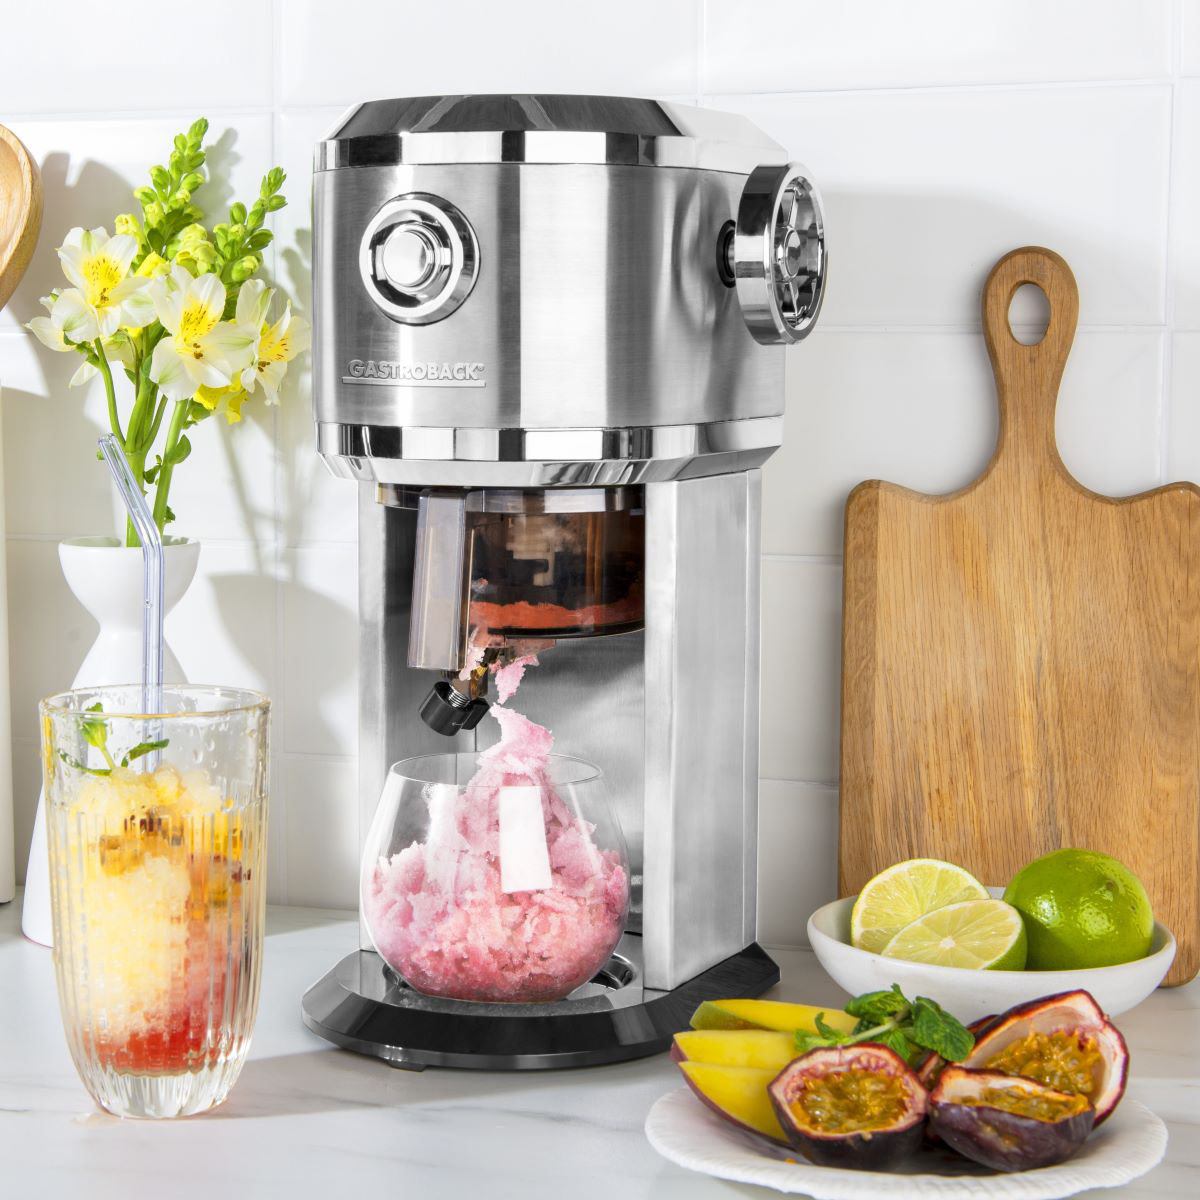 Specialist for fluffy ice cream desserts and cool drinks: “Design Ice-Shaver” from Gastroback.